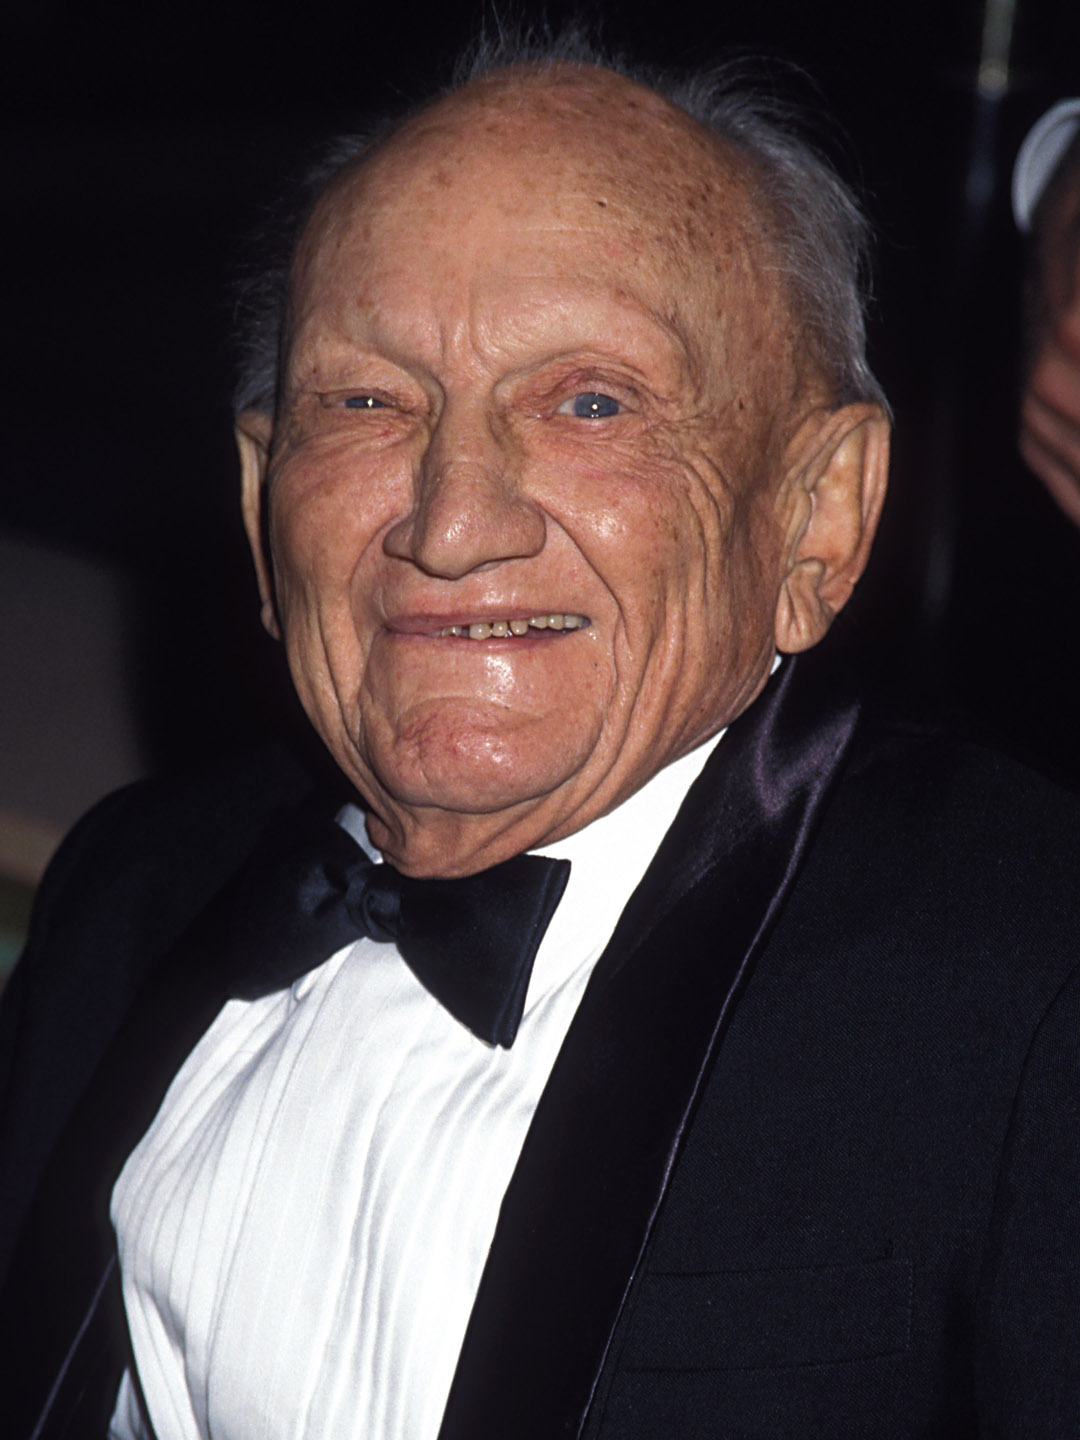 How tall is Billy Barty?